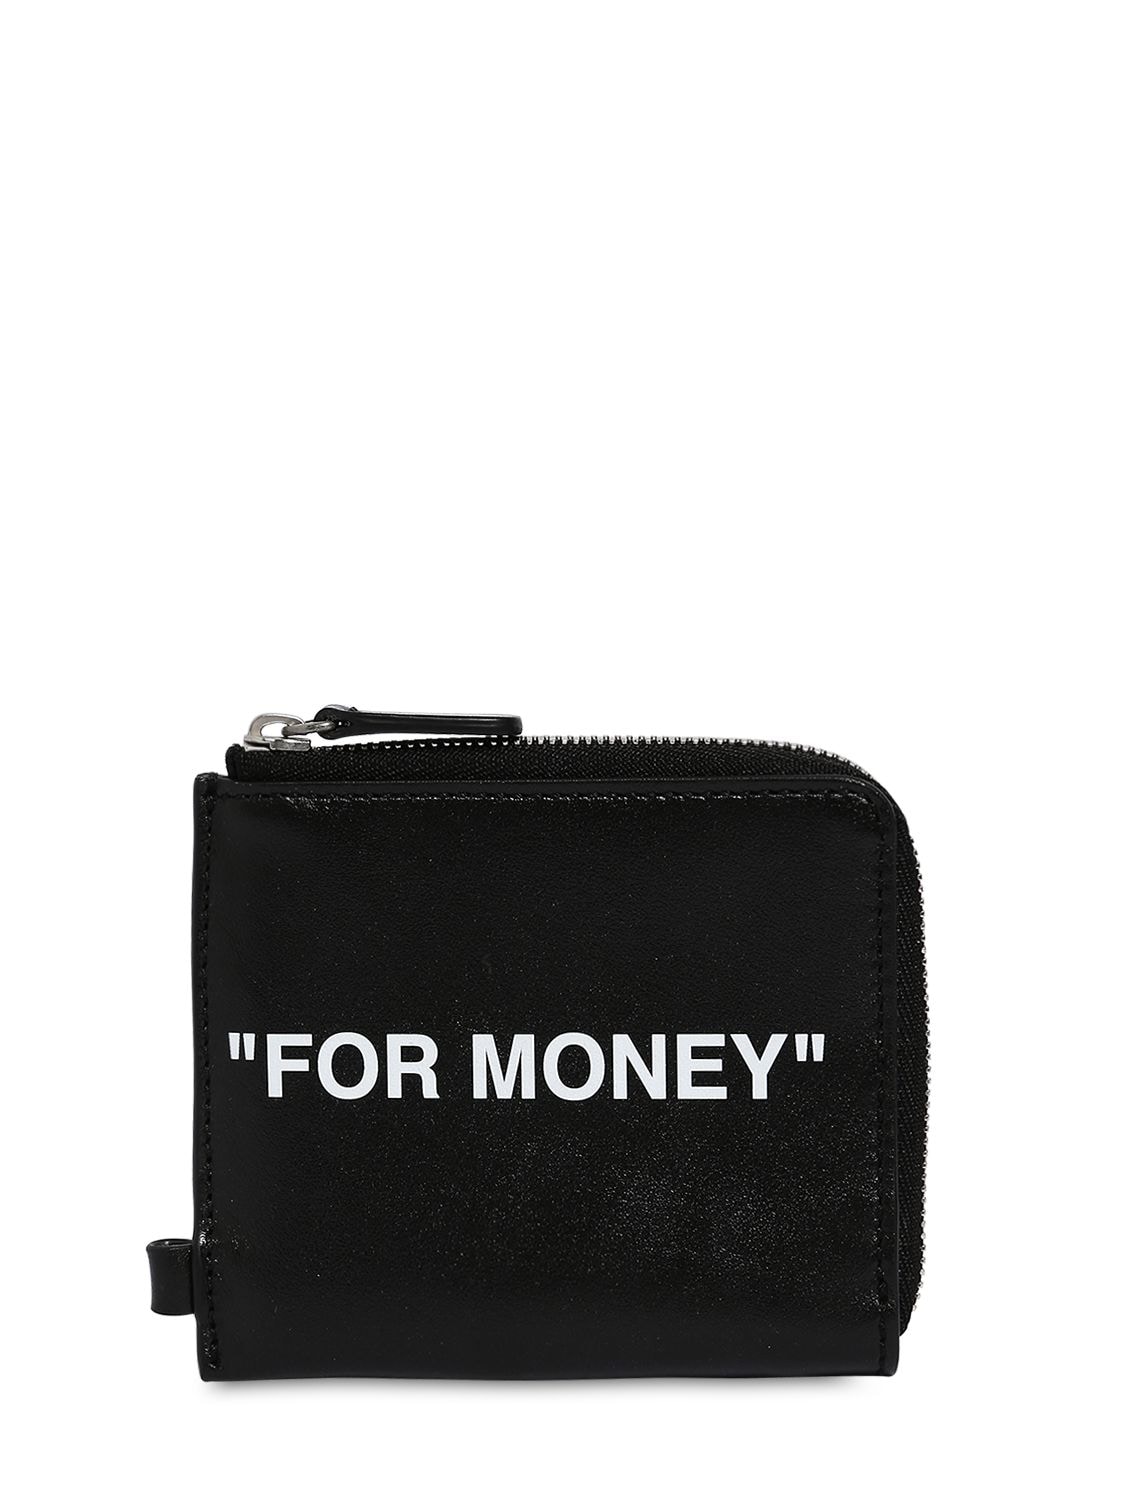 Off-white "for Money" Leather Chain Wallet In Black White | ModeSens